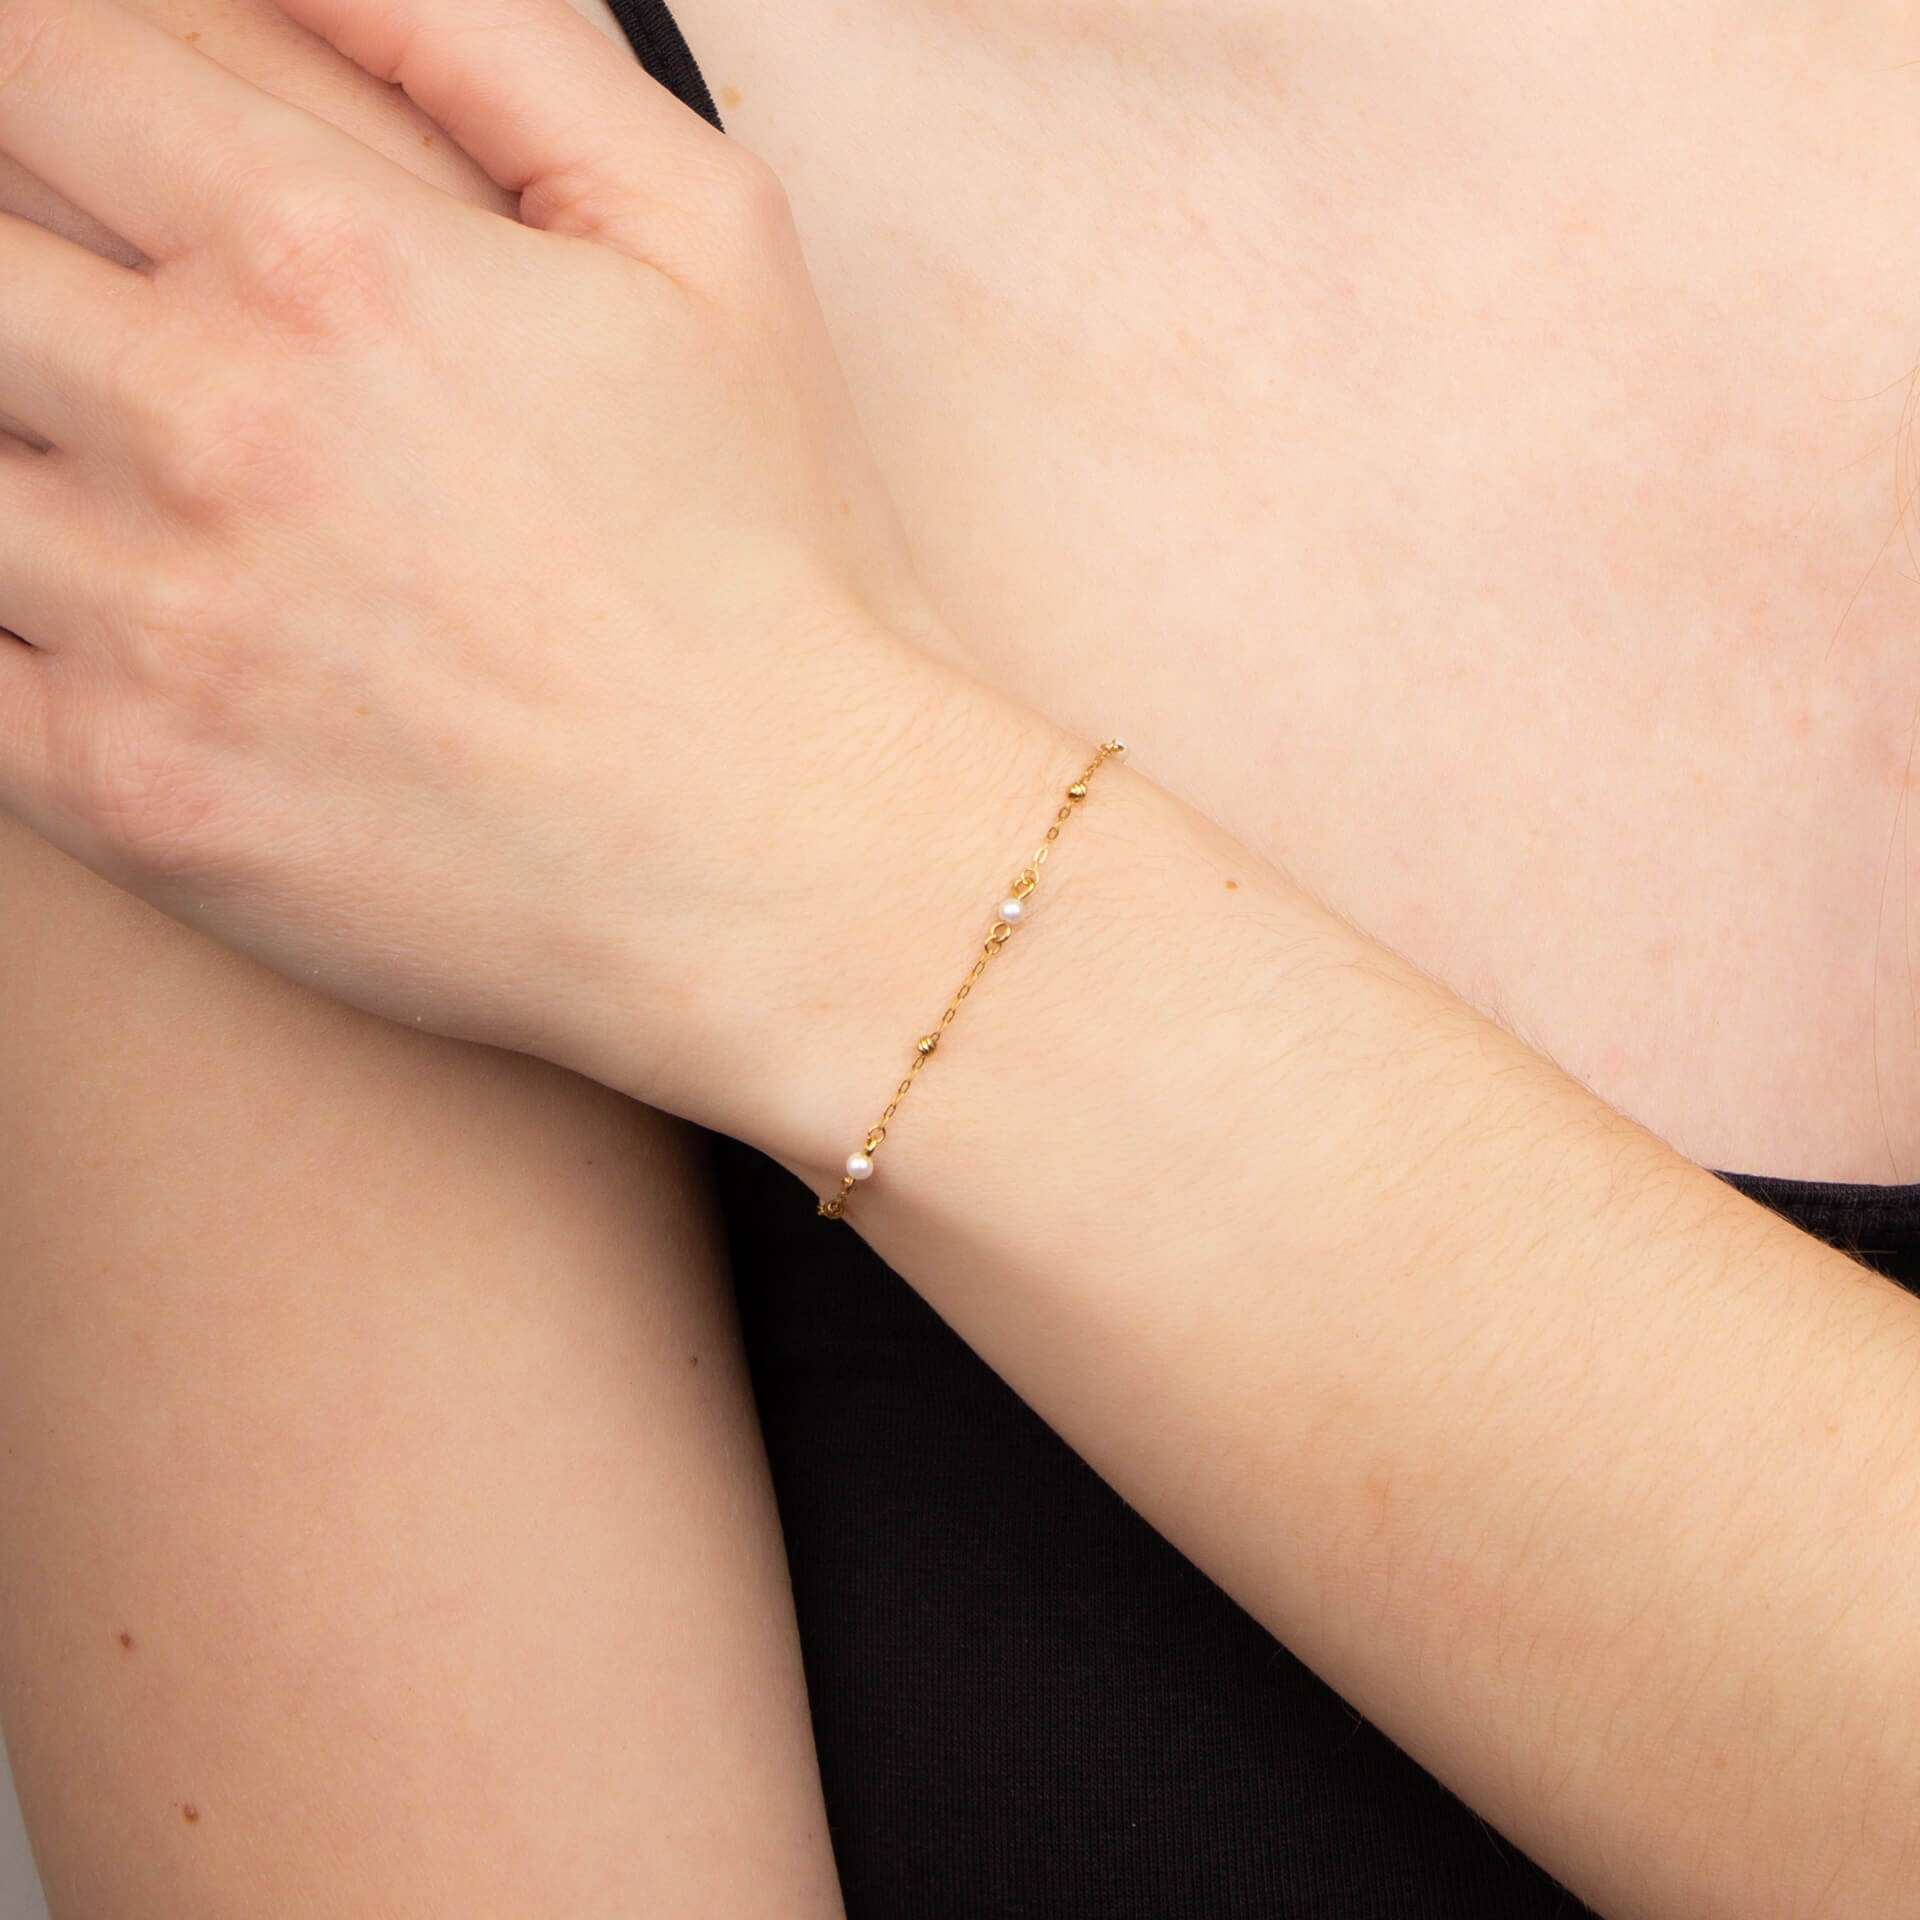 Trace Chain Station Bracelet with Freshwater Pearls in 9ct Yellow Gold - Robert Anthony Jewellers, Edinburgh